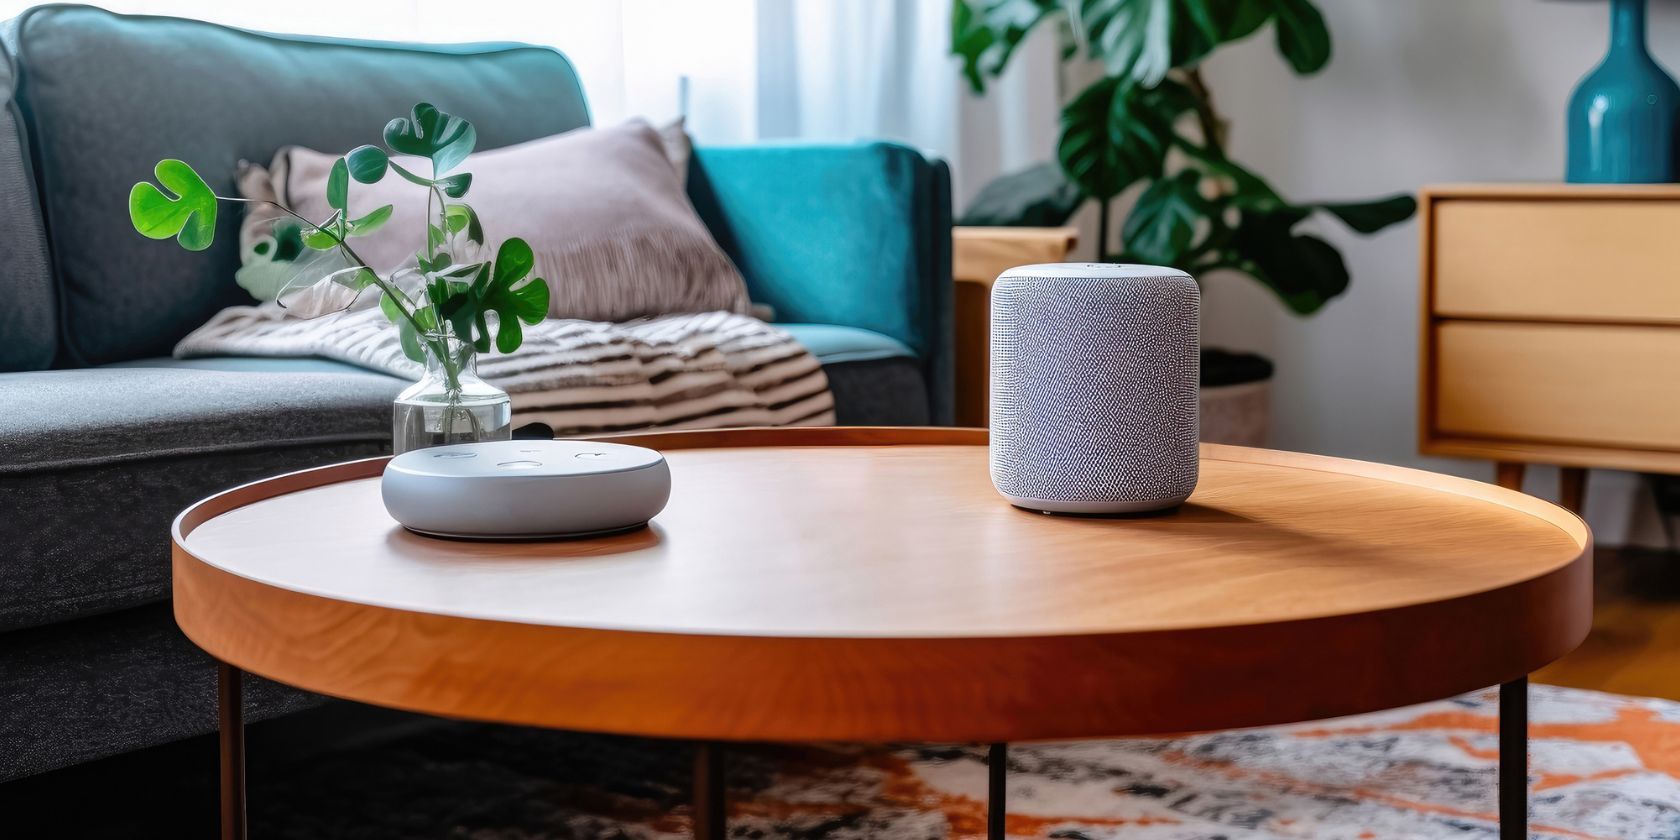 two smart speakers on coffee table in living room